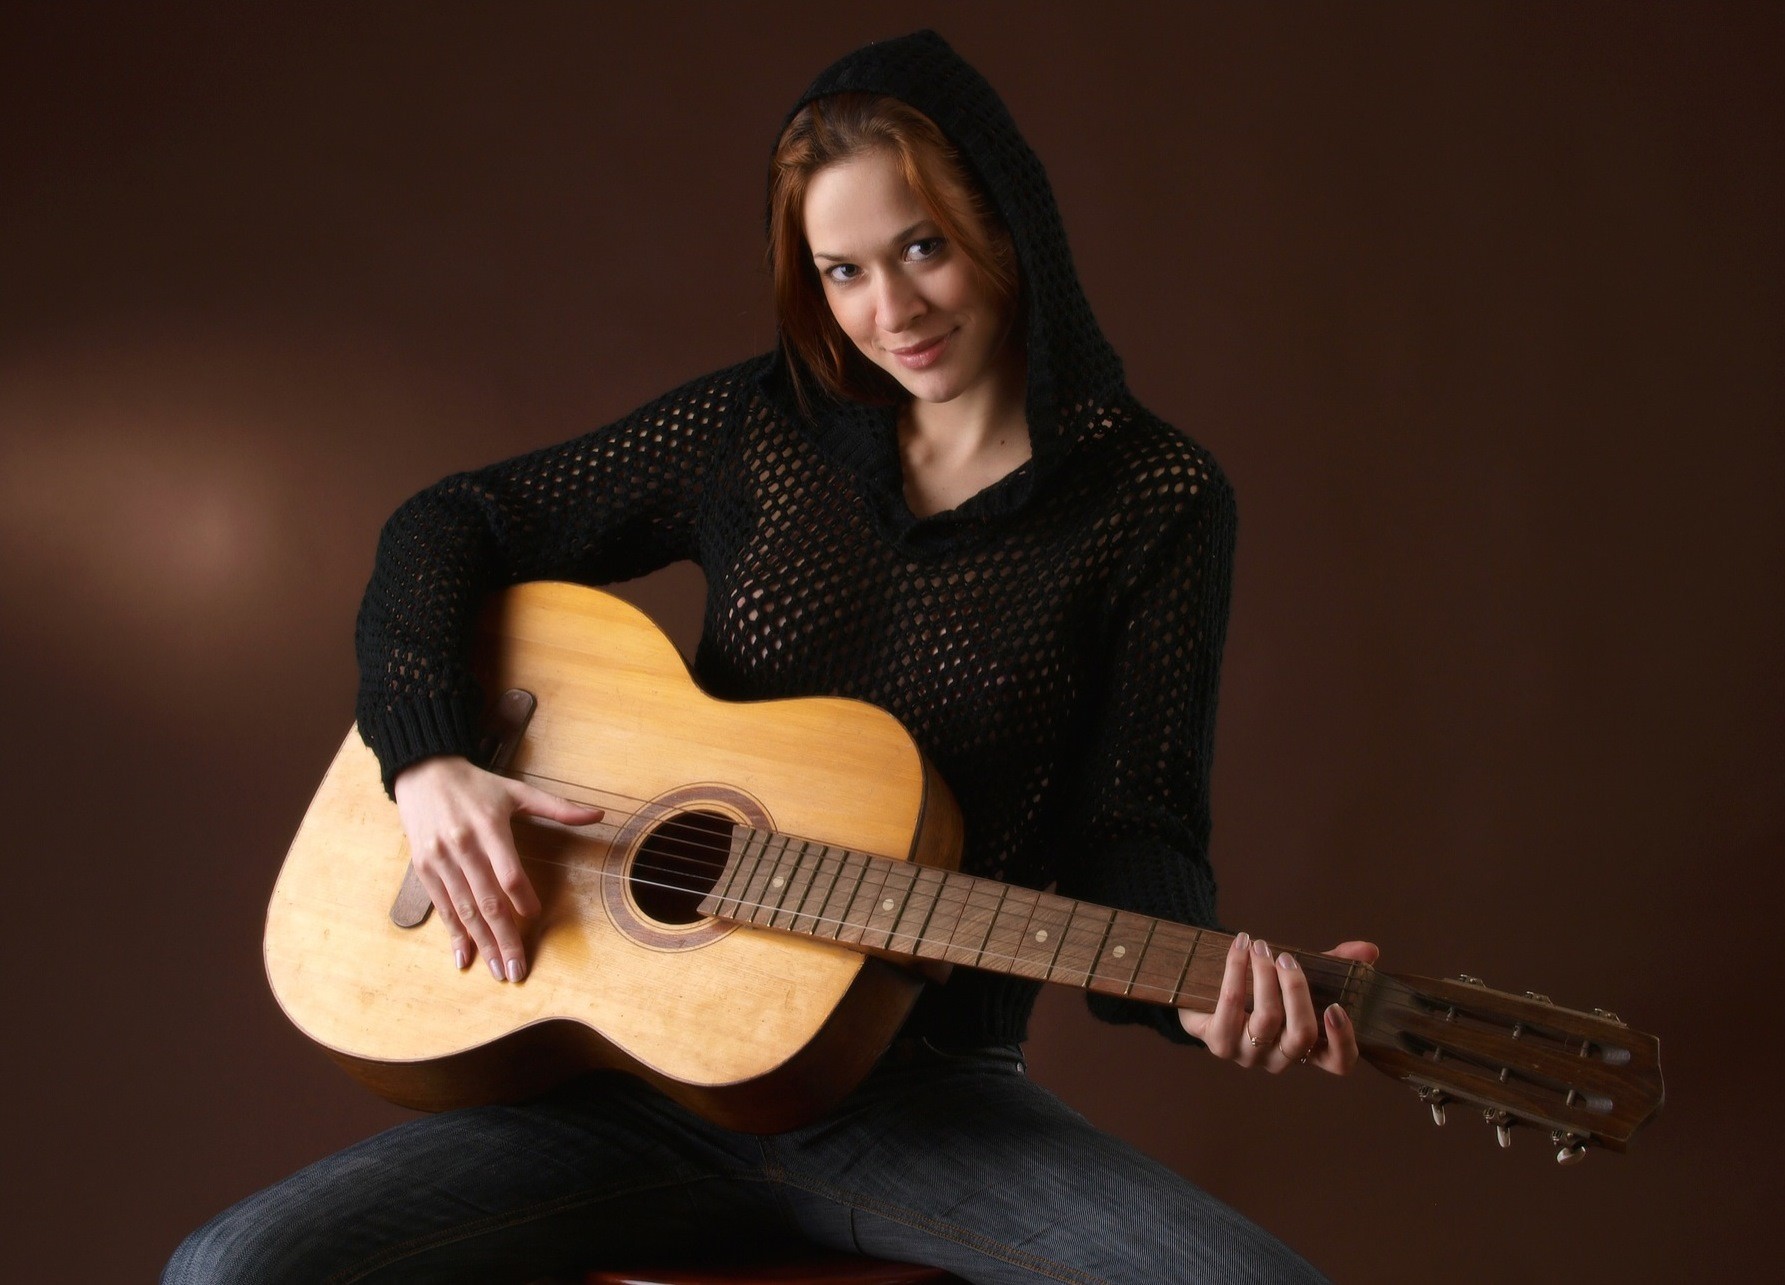 People 1785x1285 guitar women model see-through clothing knit fabric nipples through clothing women indoors indoors musical instrument spread legs sitting brown background simple background smiling looking at viewer studio